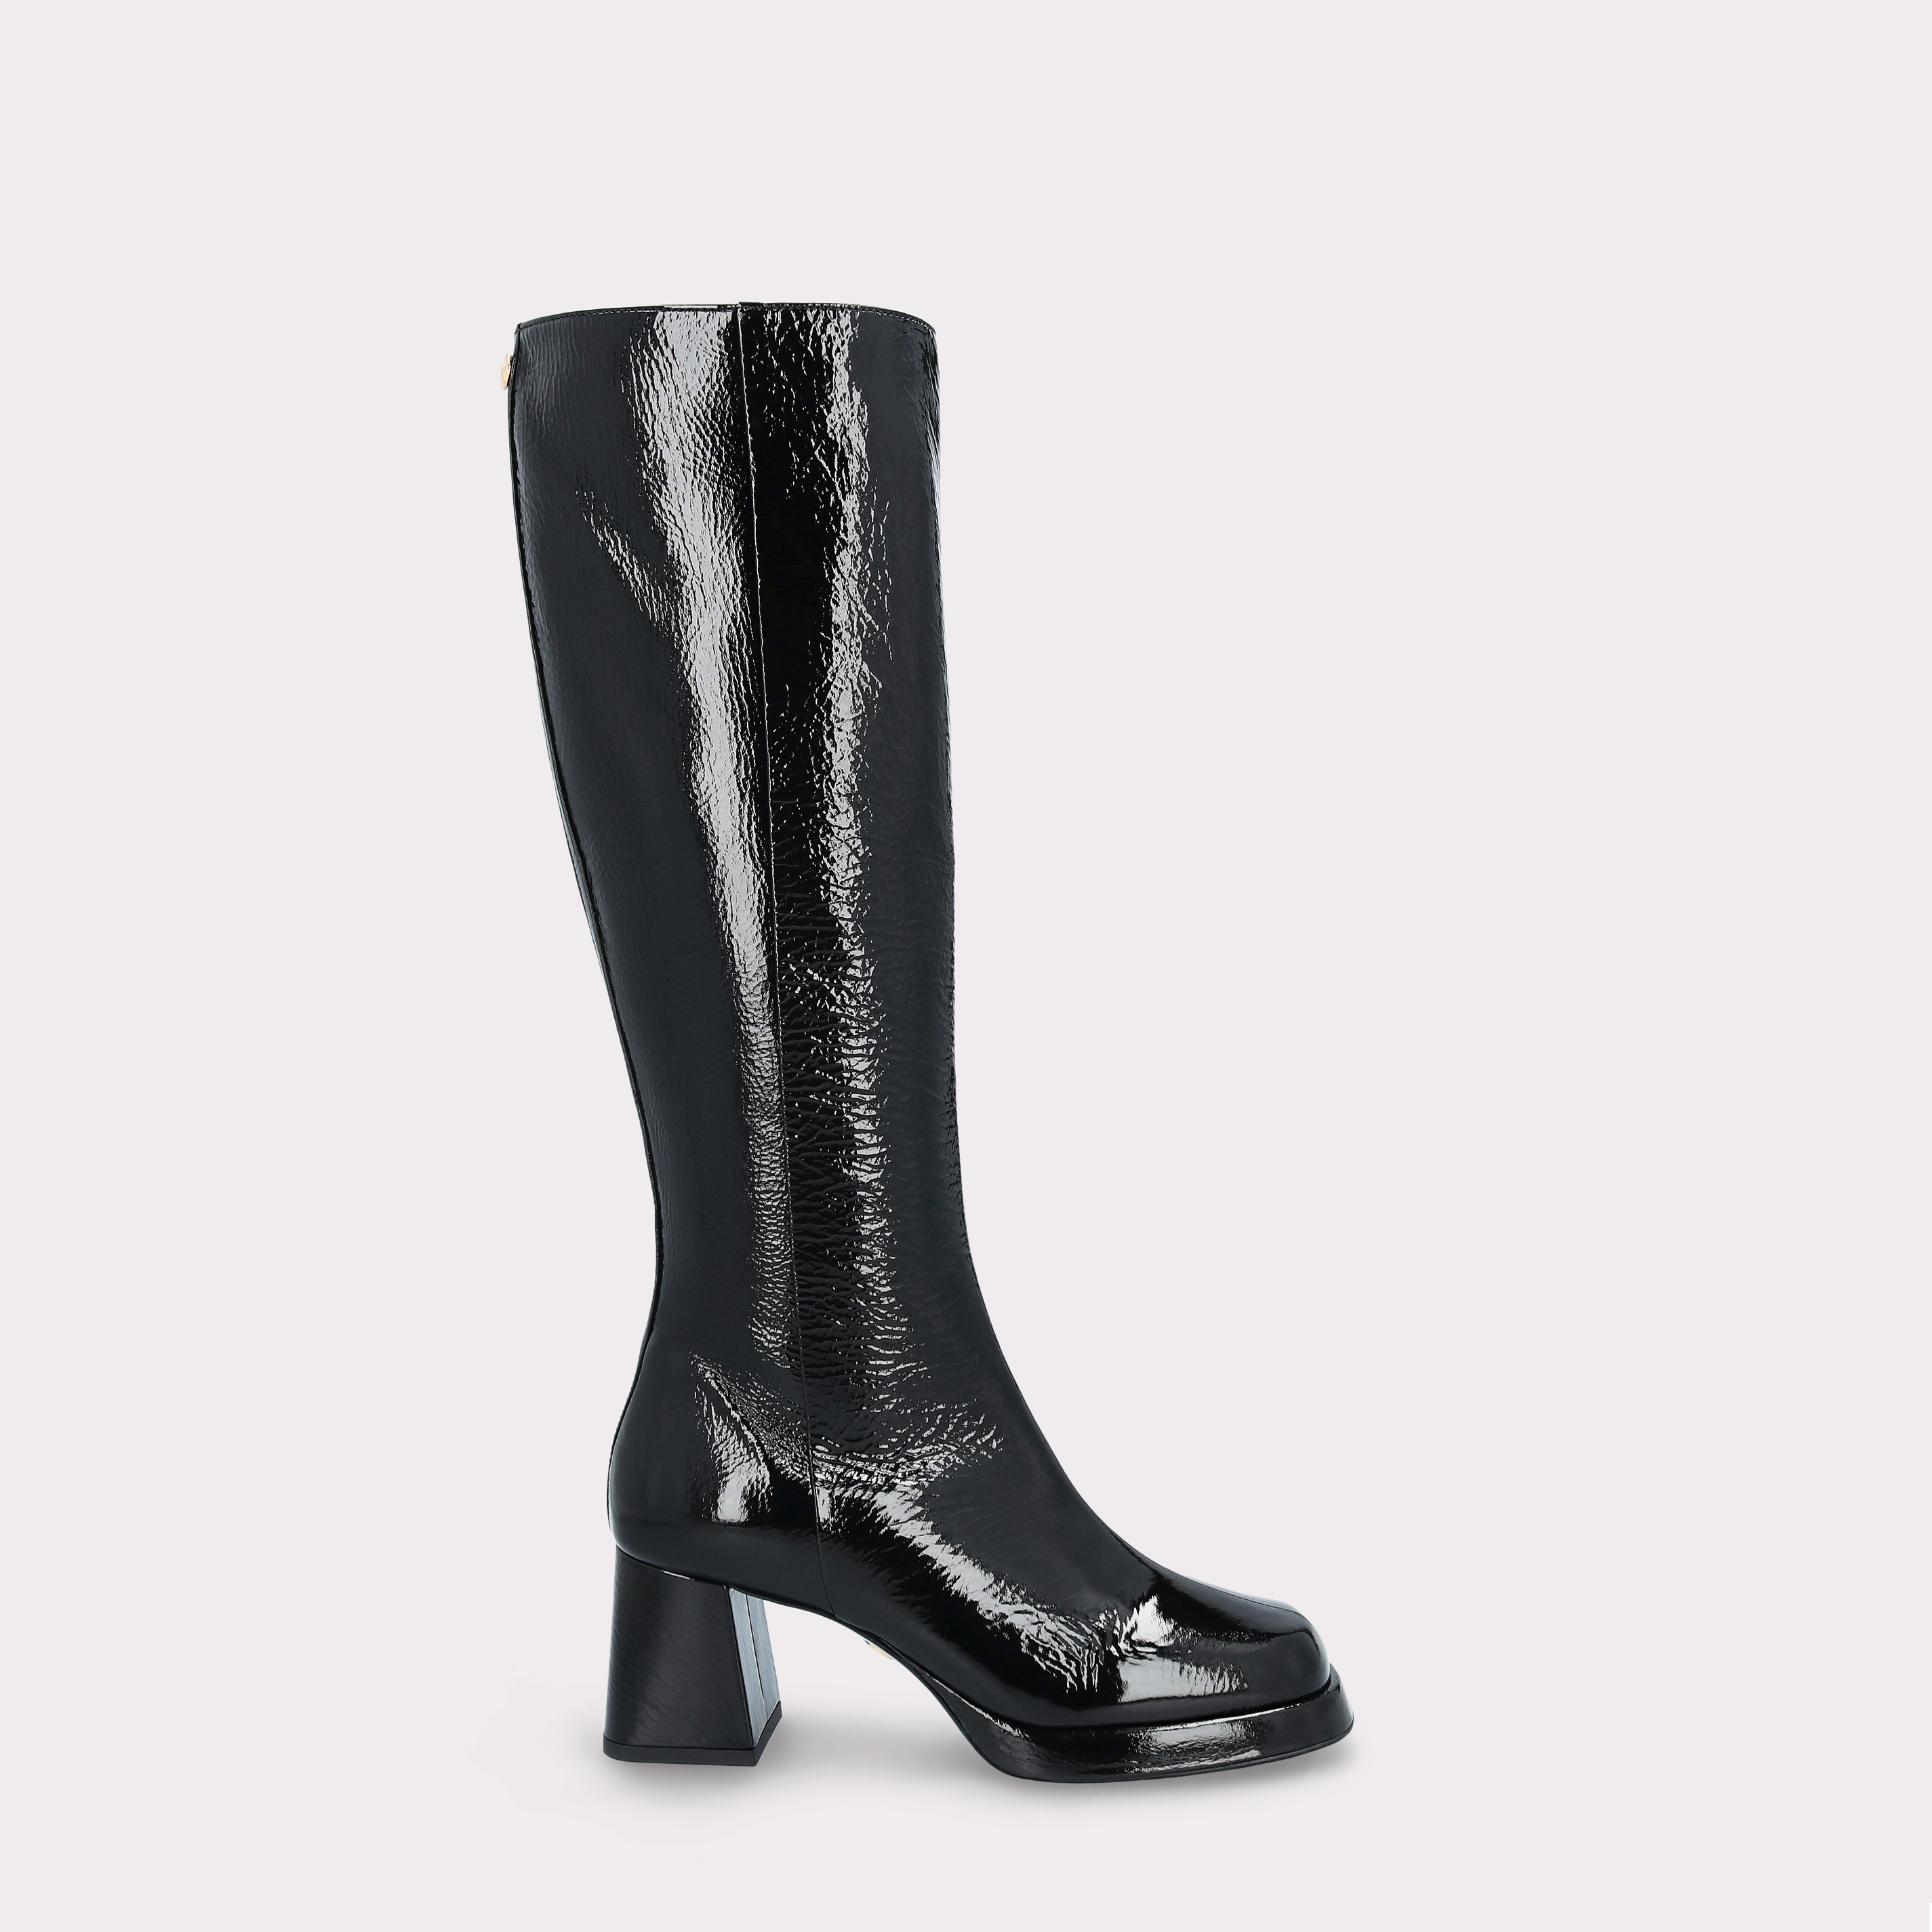 CONNIE 01 BLACK CRUSHED PATENT LEATHER PLATFORM BOOTS